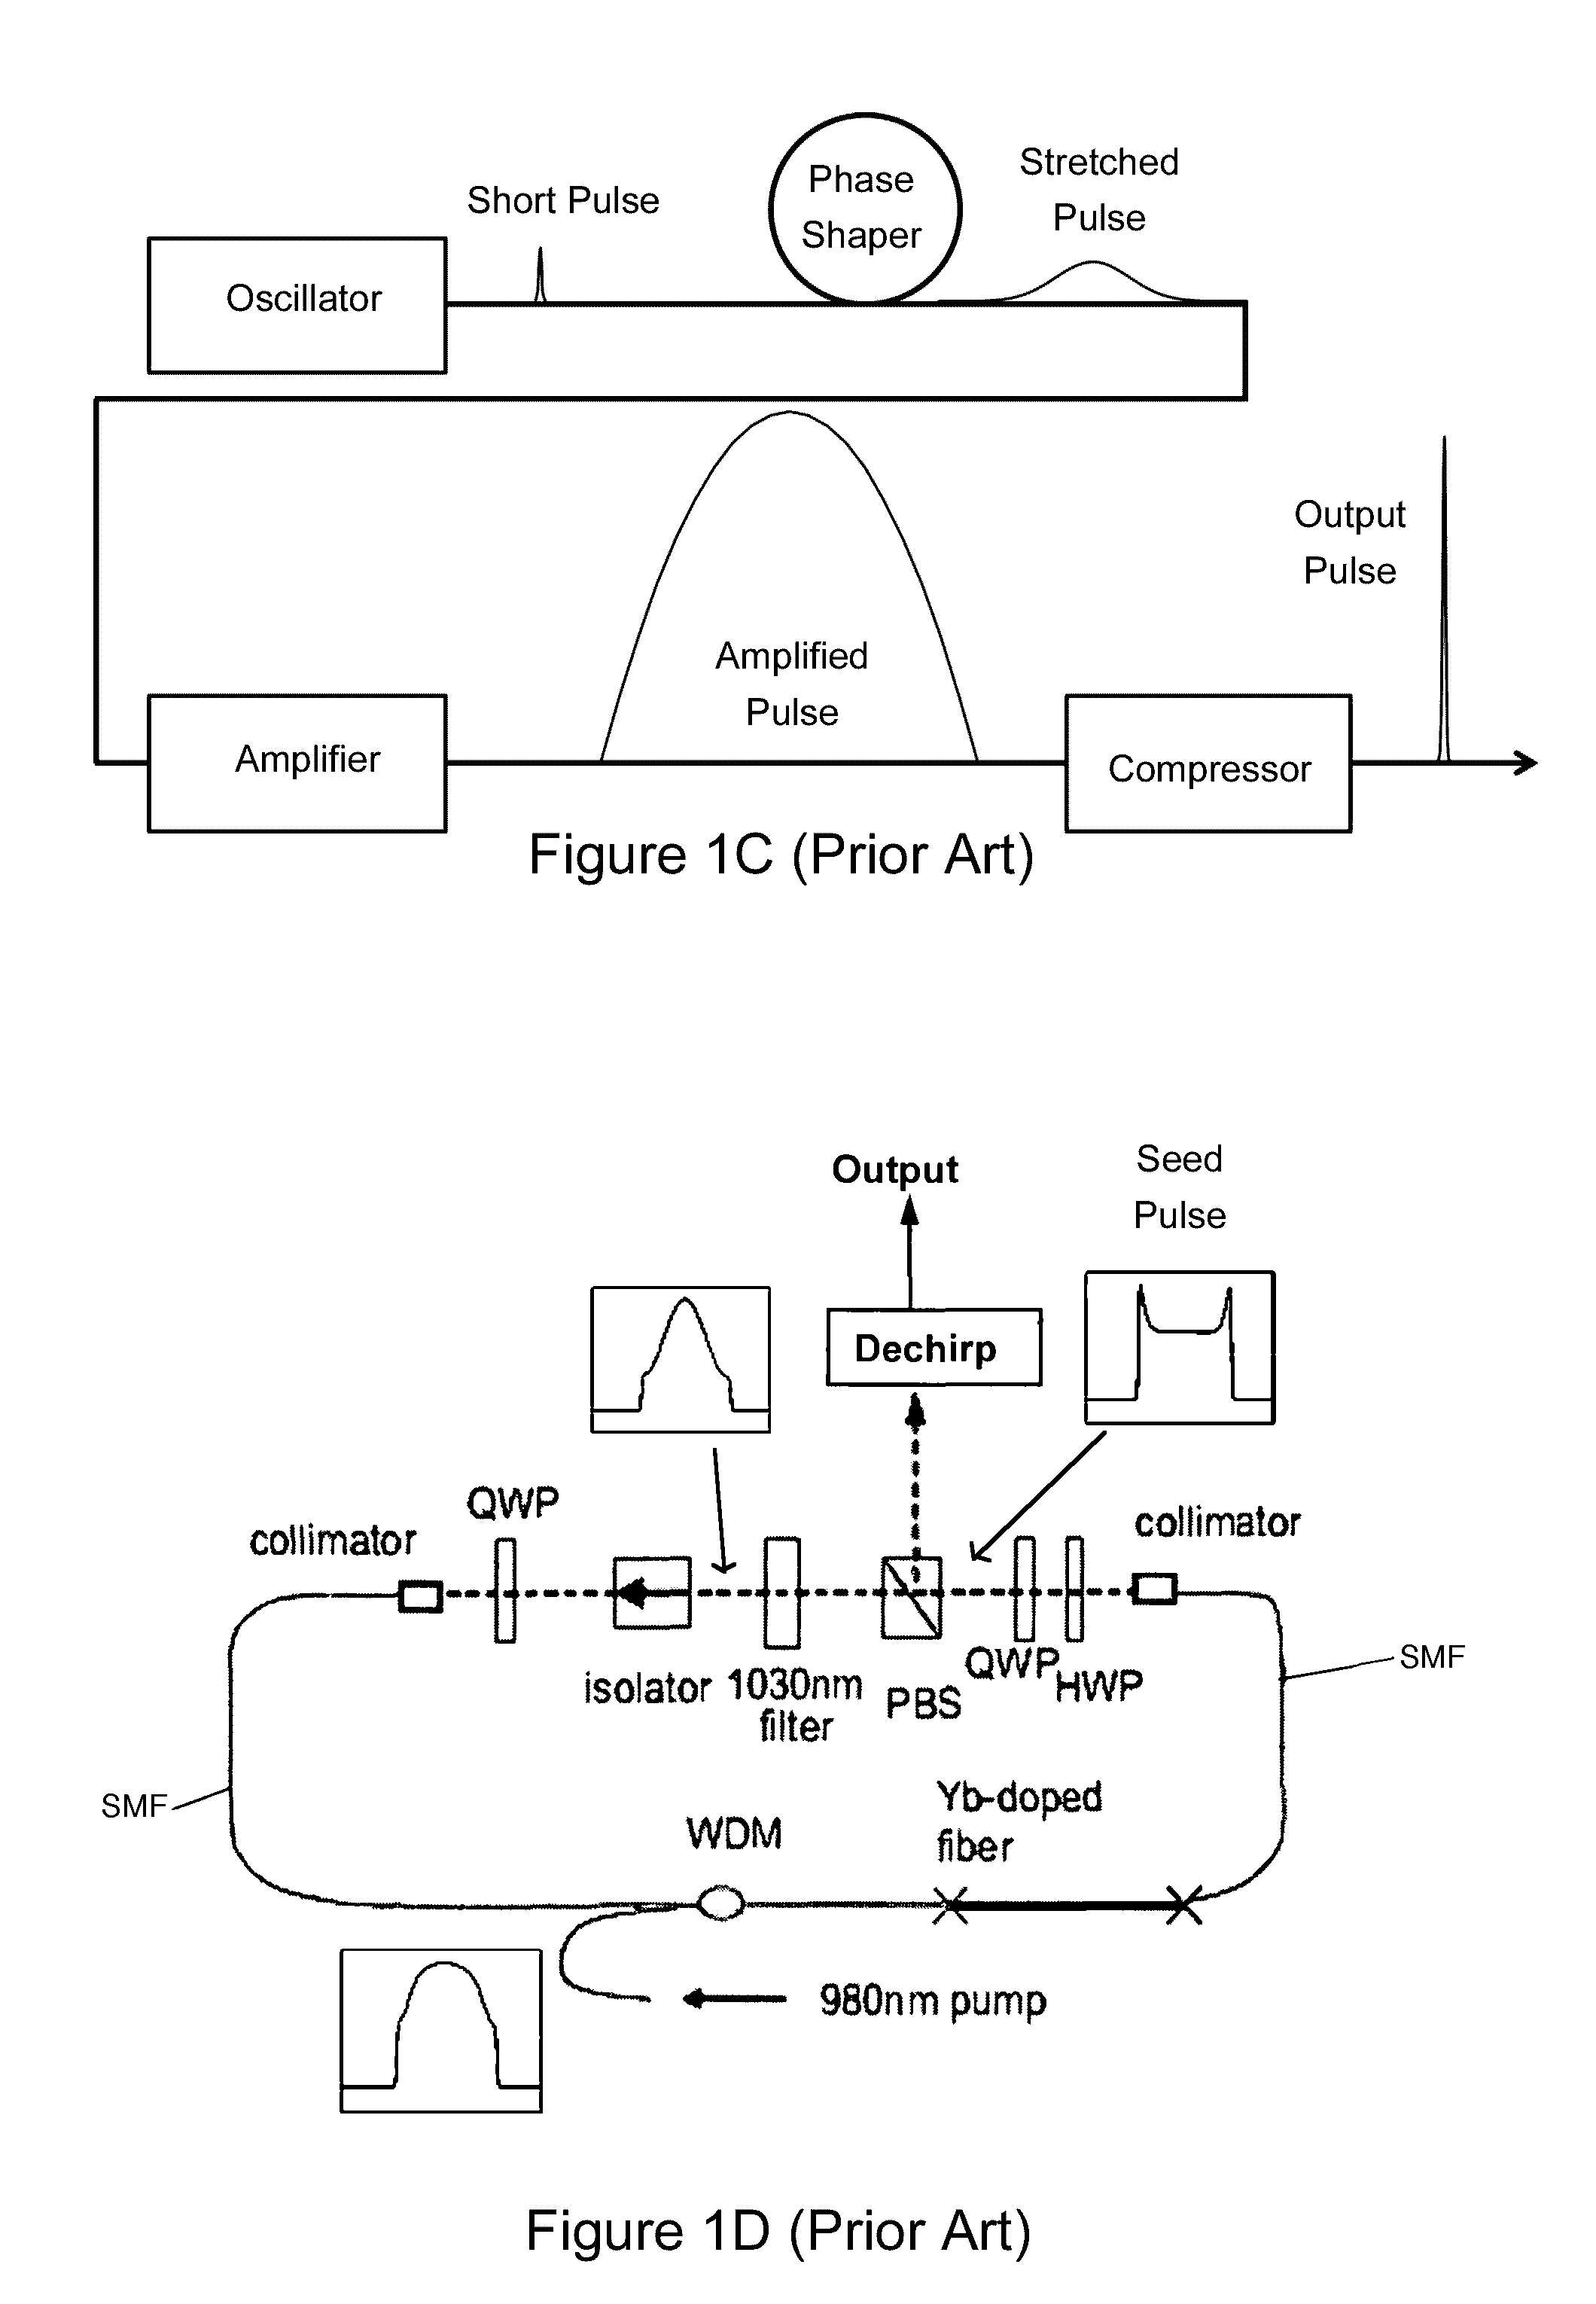 Single pass amplification of dissipative soliton-like seed pulses